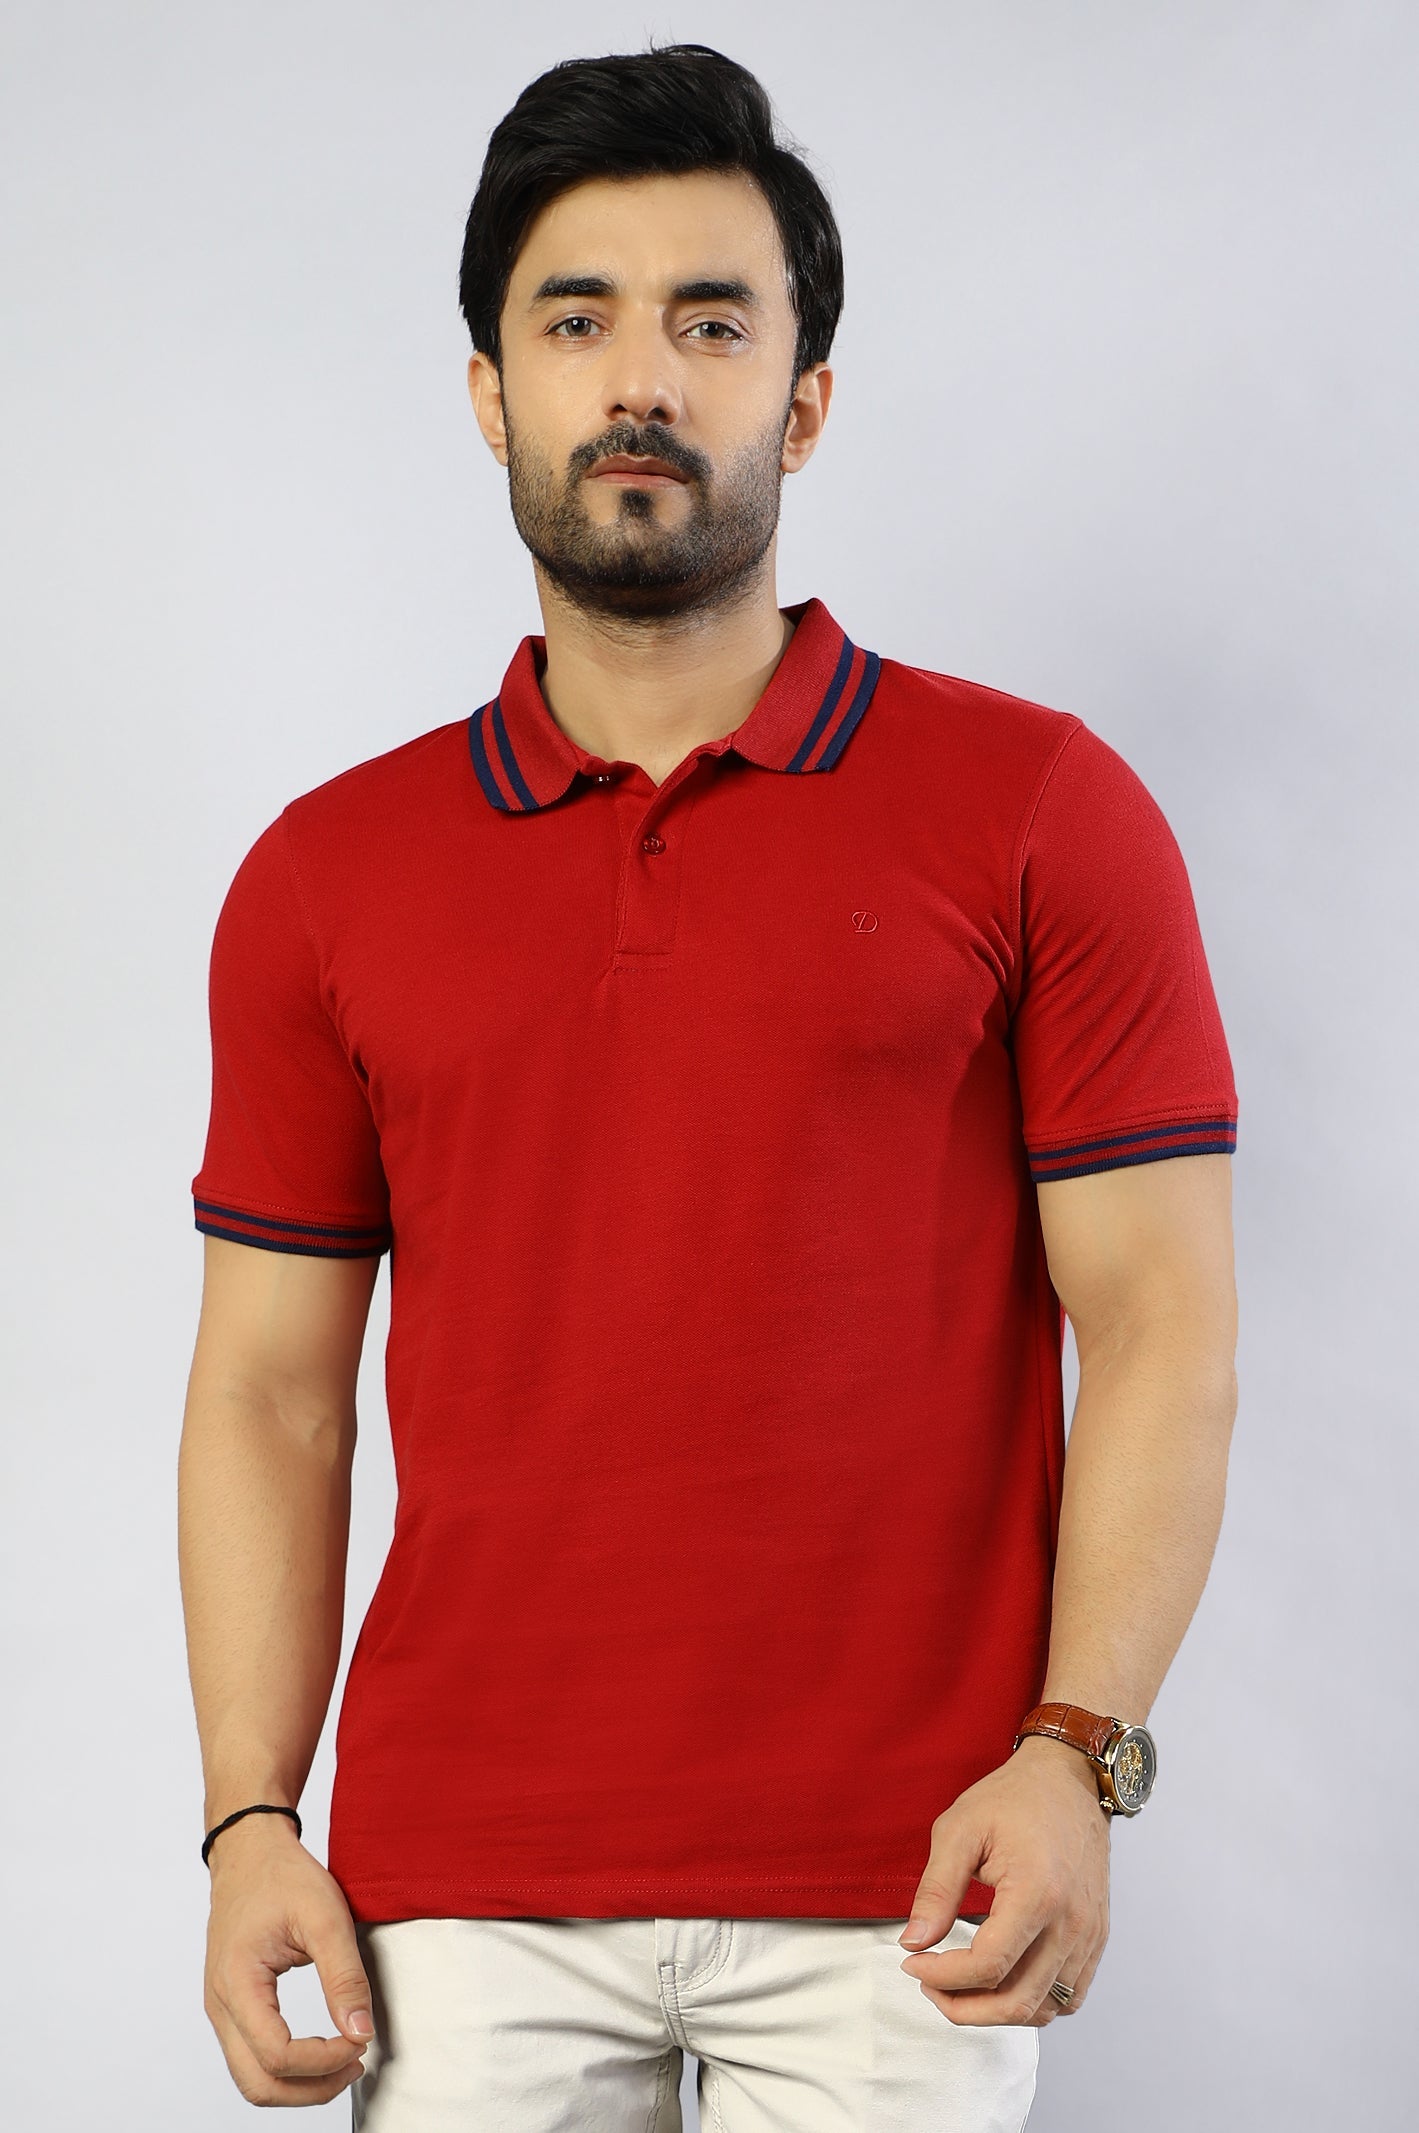 Jacquard Collar Polo Shirt From Diners